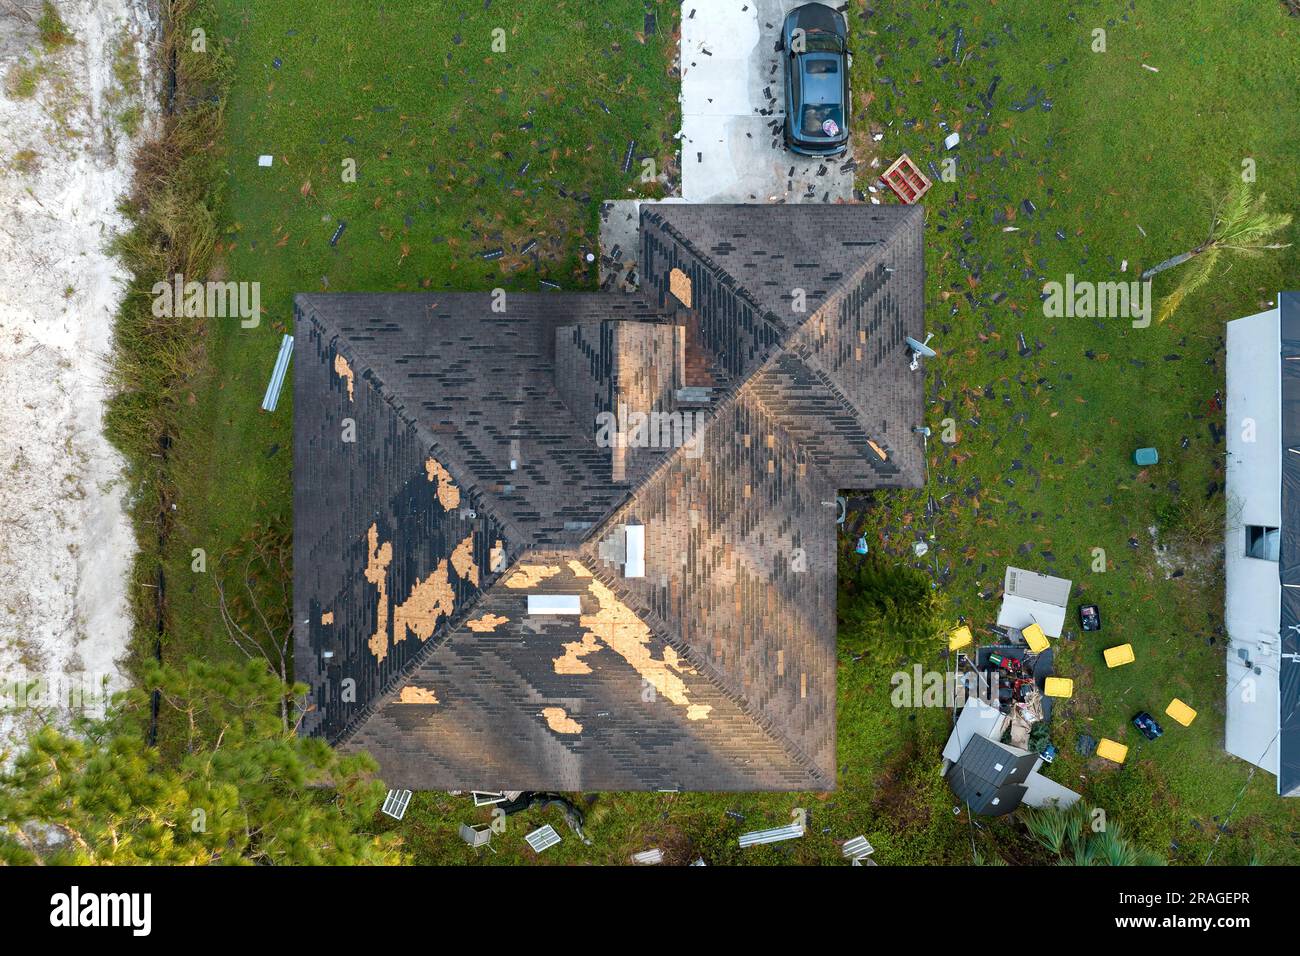 Consequences of natural disaster. Damaged house roof with missing shingles after hurricane Ian in Florida. Stock Photo